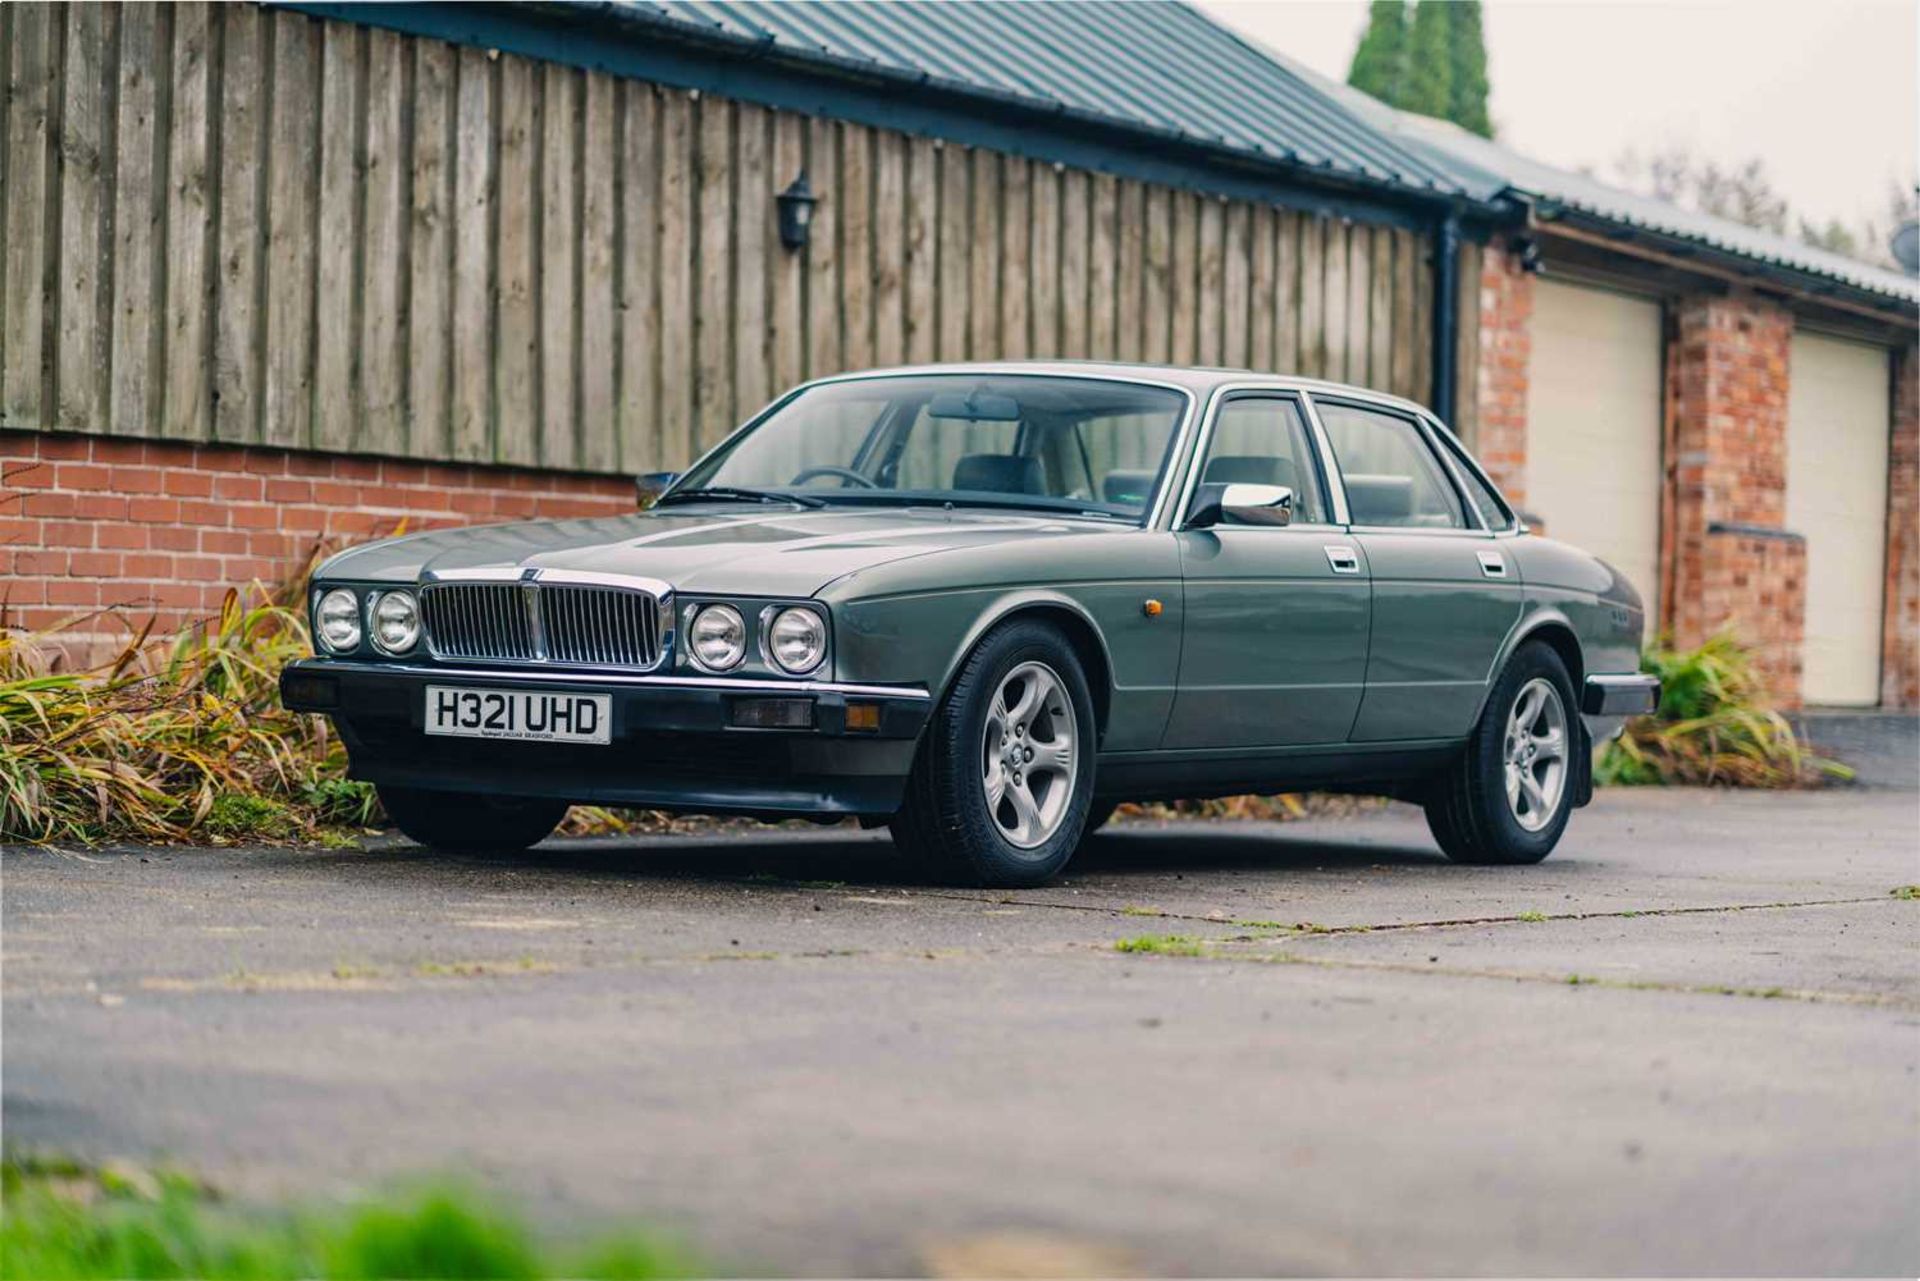 1990 Jaguar XJ40 Highly-original, timewarp example, with just 16,700 warranted miles from new - Image 4 of 70